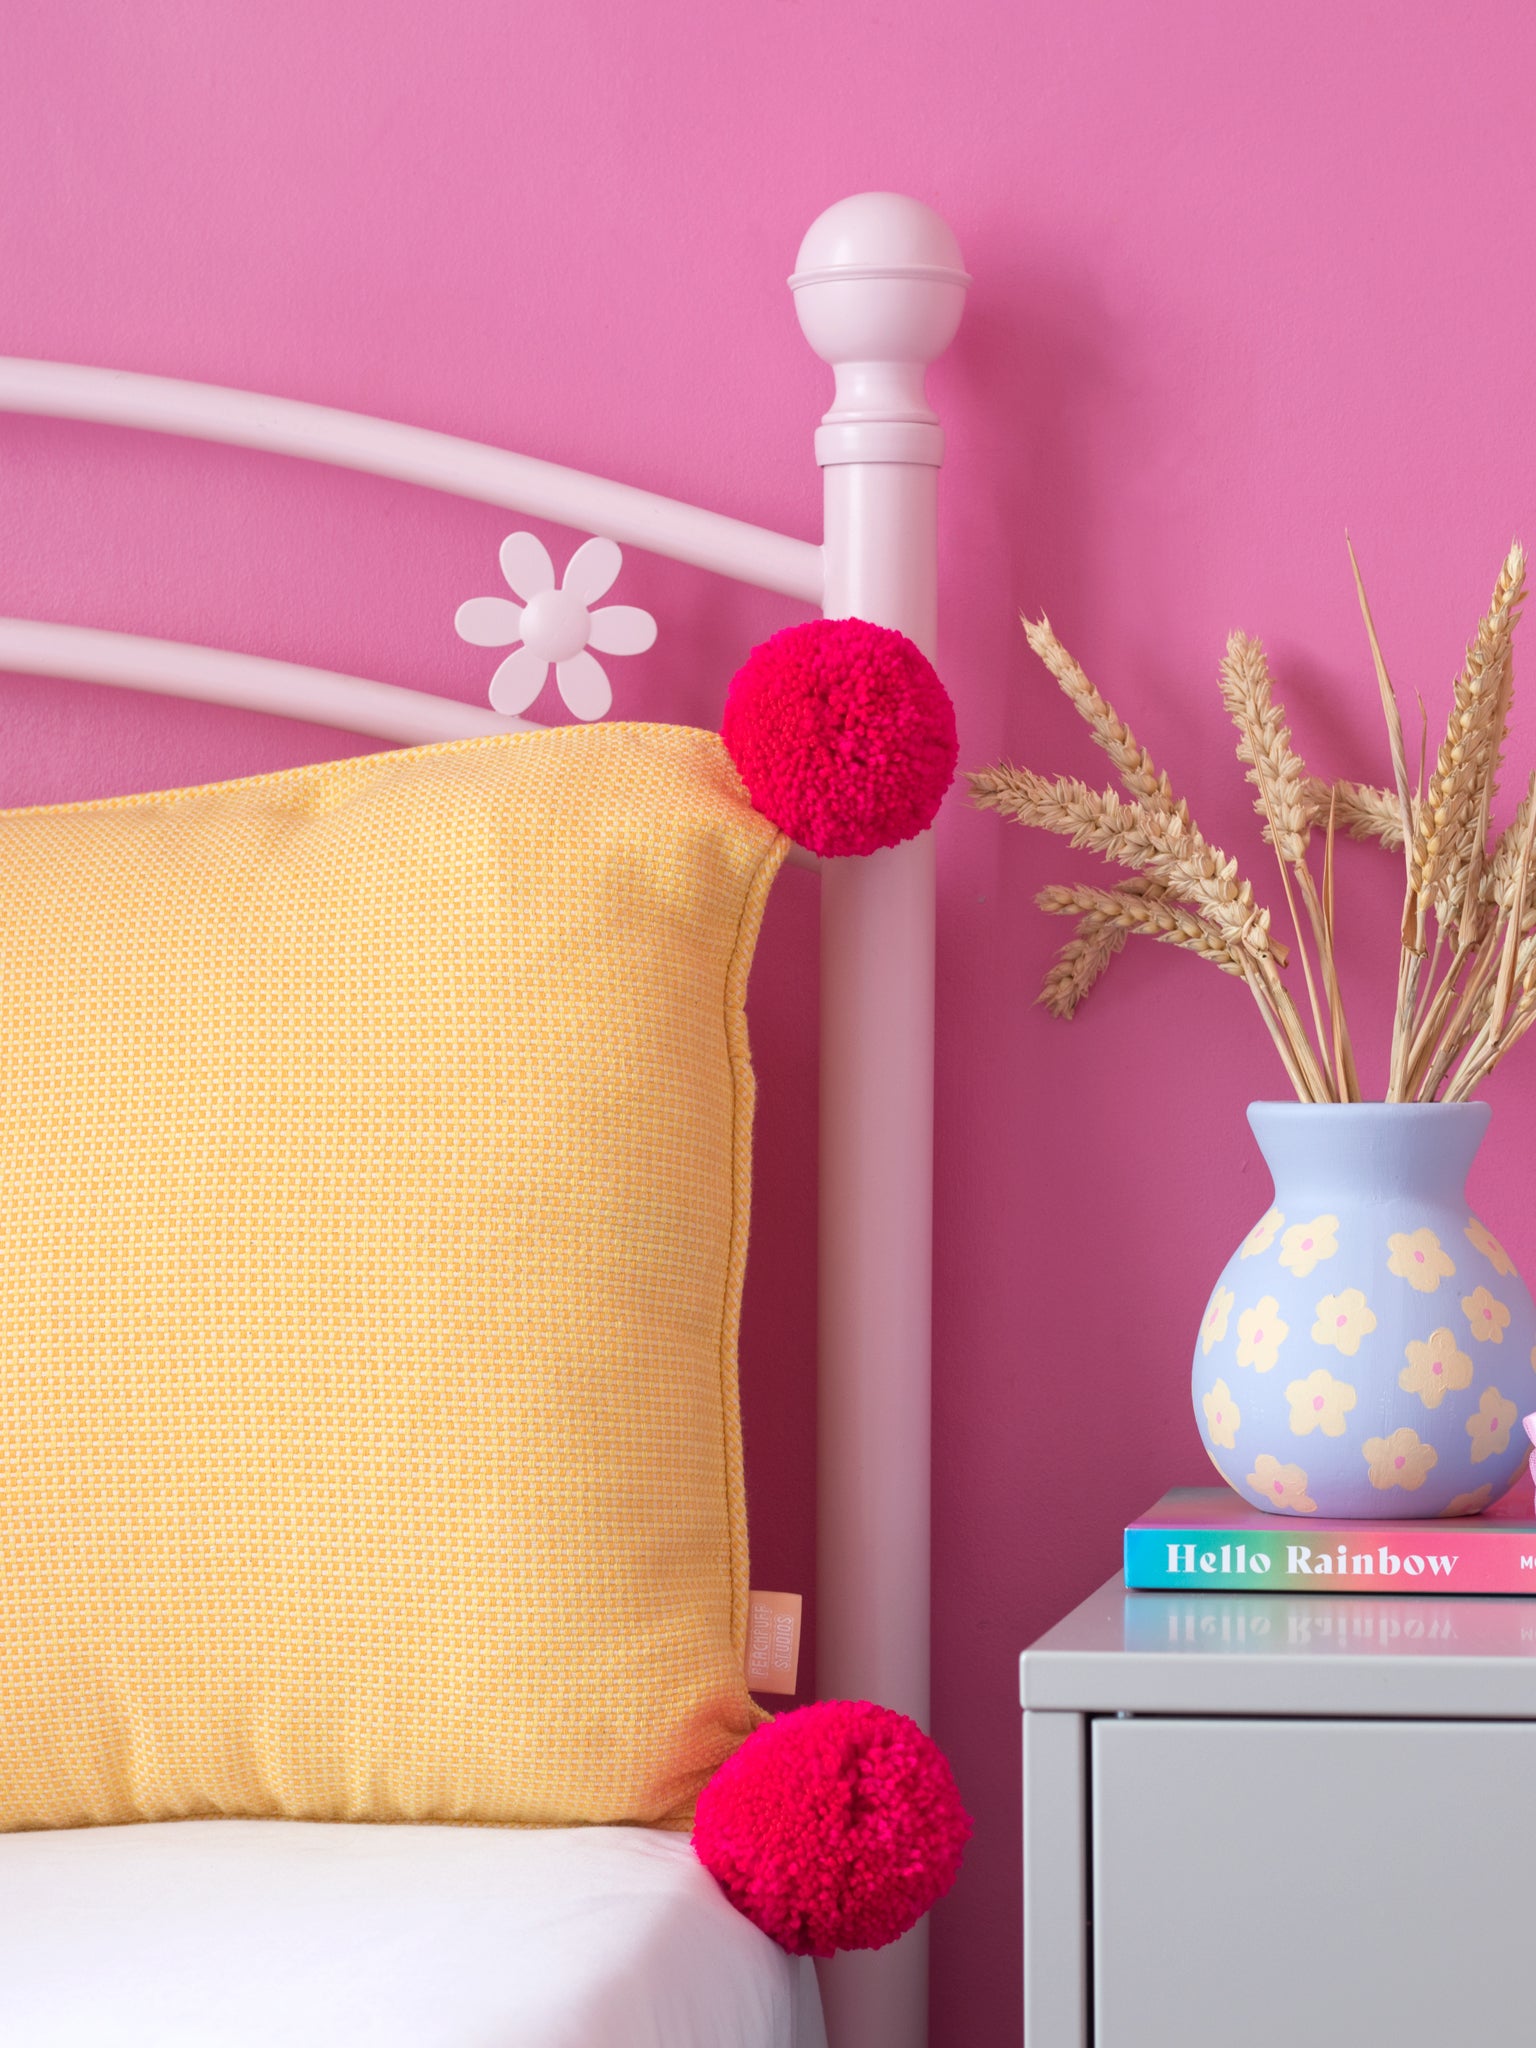 A yellow textured cushion with bright pink pom-poms on a pink flower bed next to a dressing table styled with dried flowers and a book.